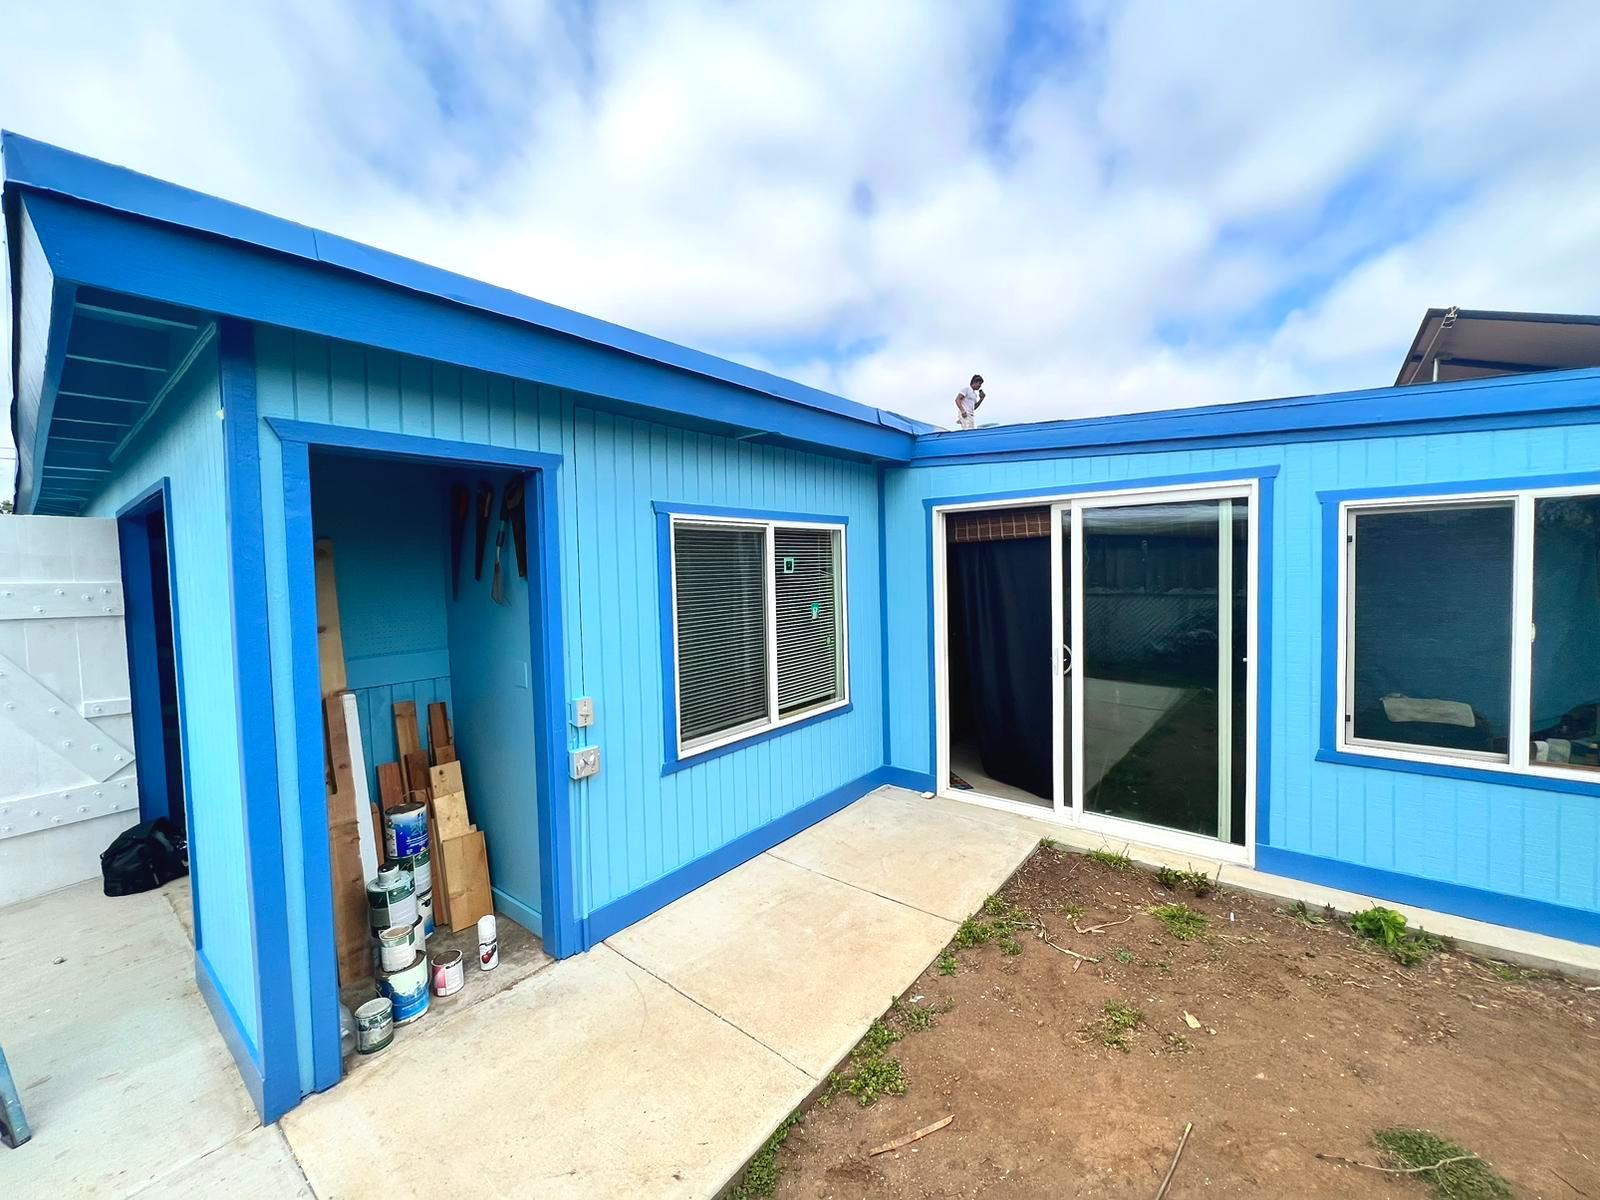 Check out this incredible Coolwall exterior coating project recently completed by Genesis Home Improvements in Vista, CA! Our skilled team transformed this house into a stunning masterpiece,